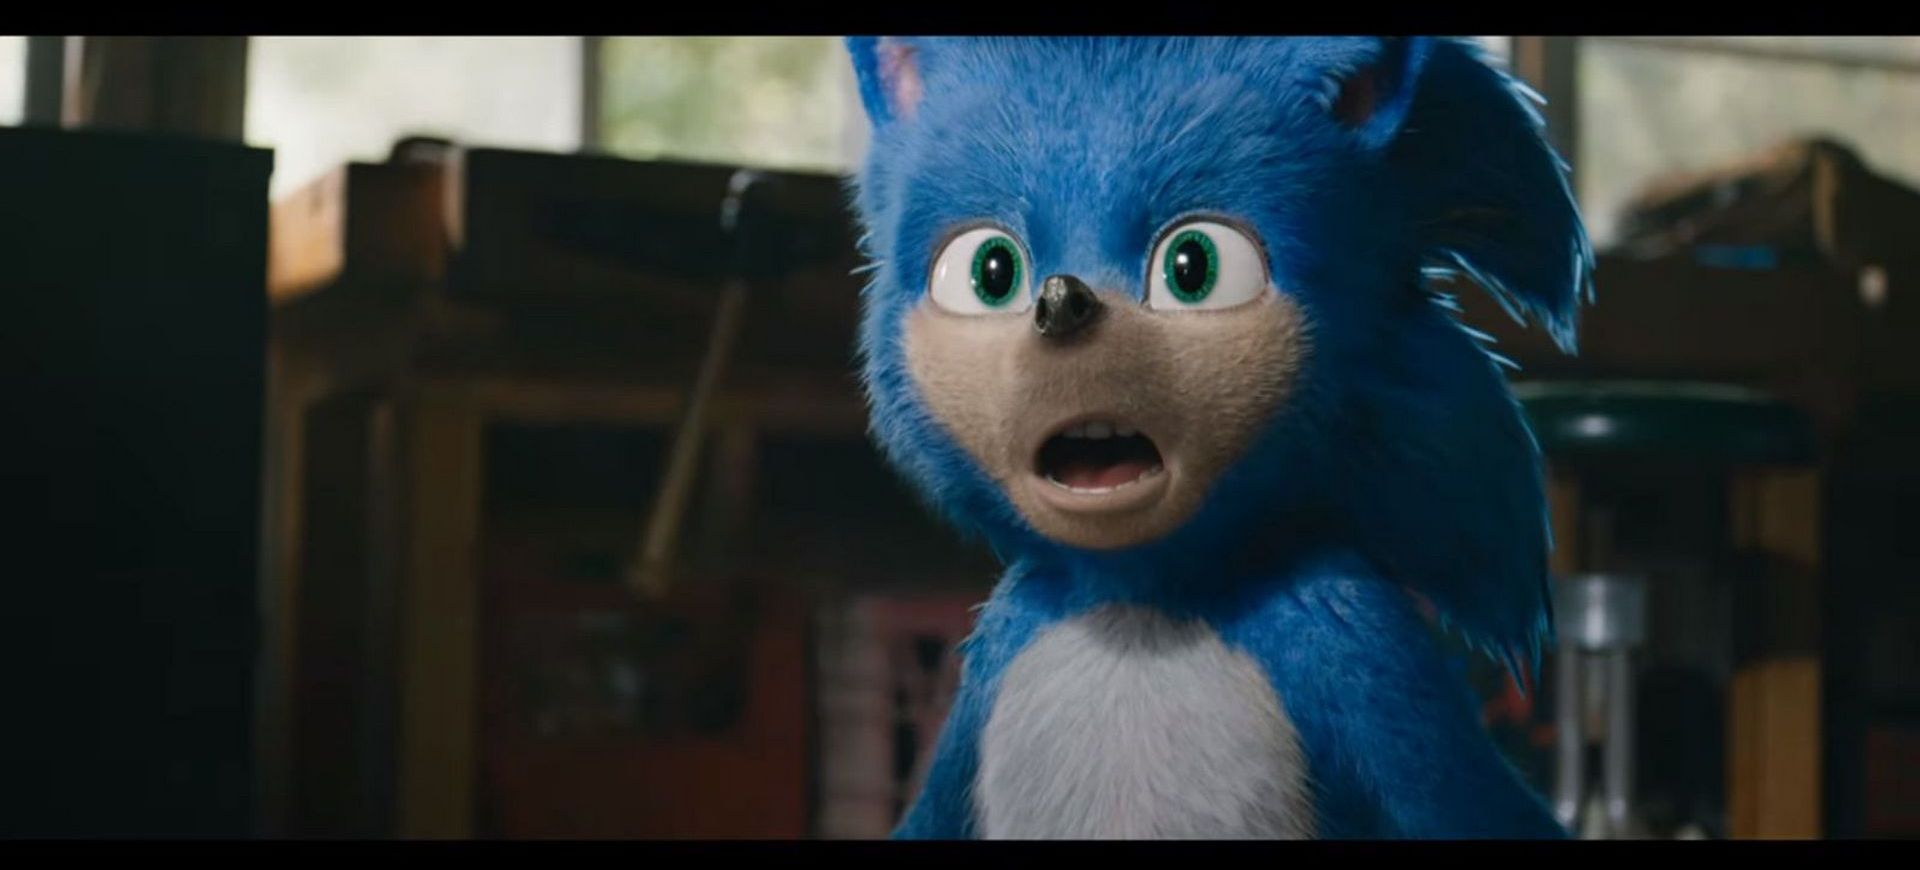 Sonic the Hedgehog movie to be redesigned after criticism of trailer   Movies  The Guardian